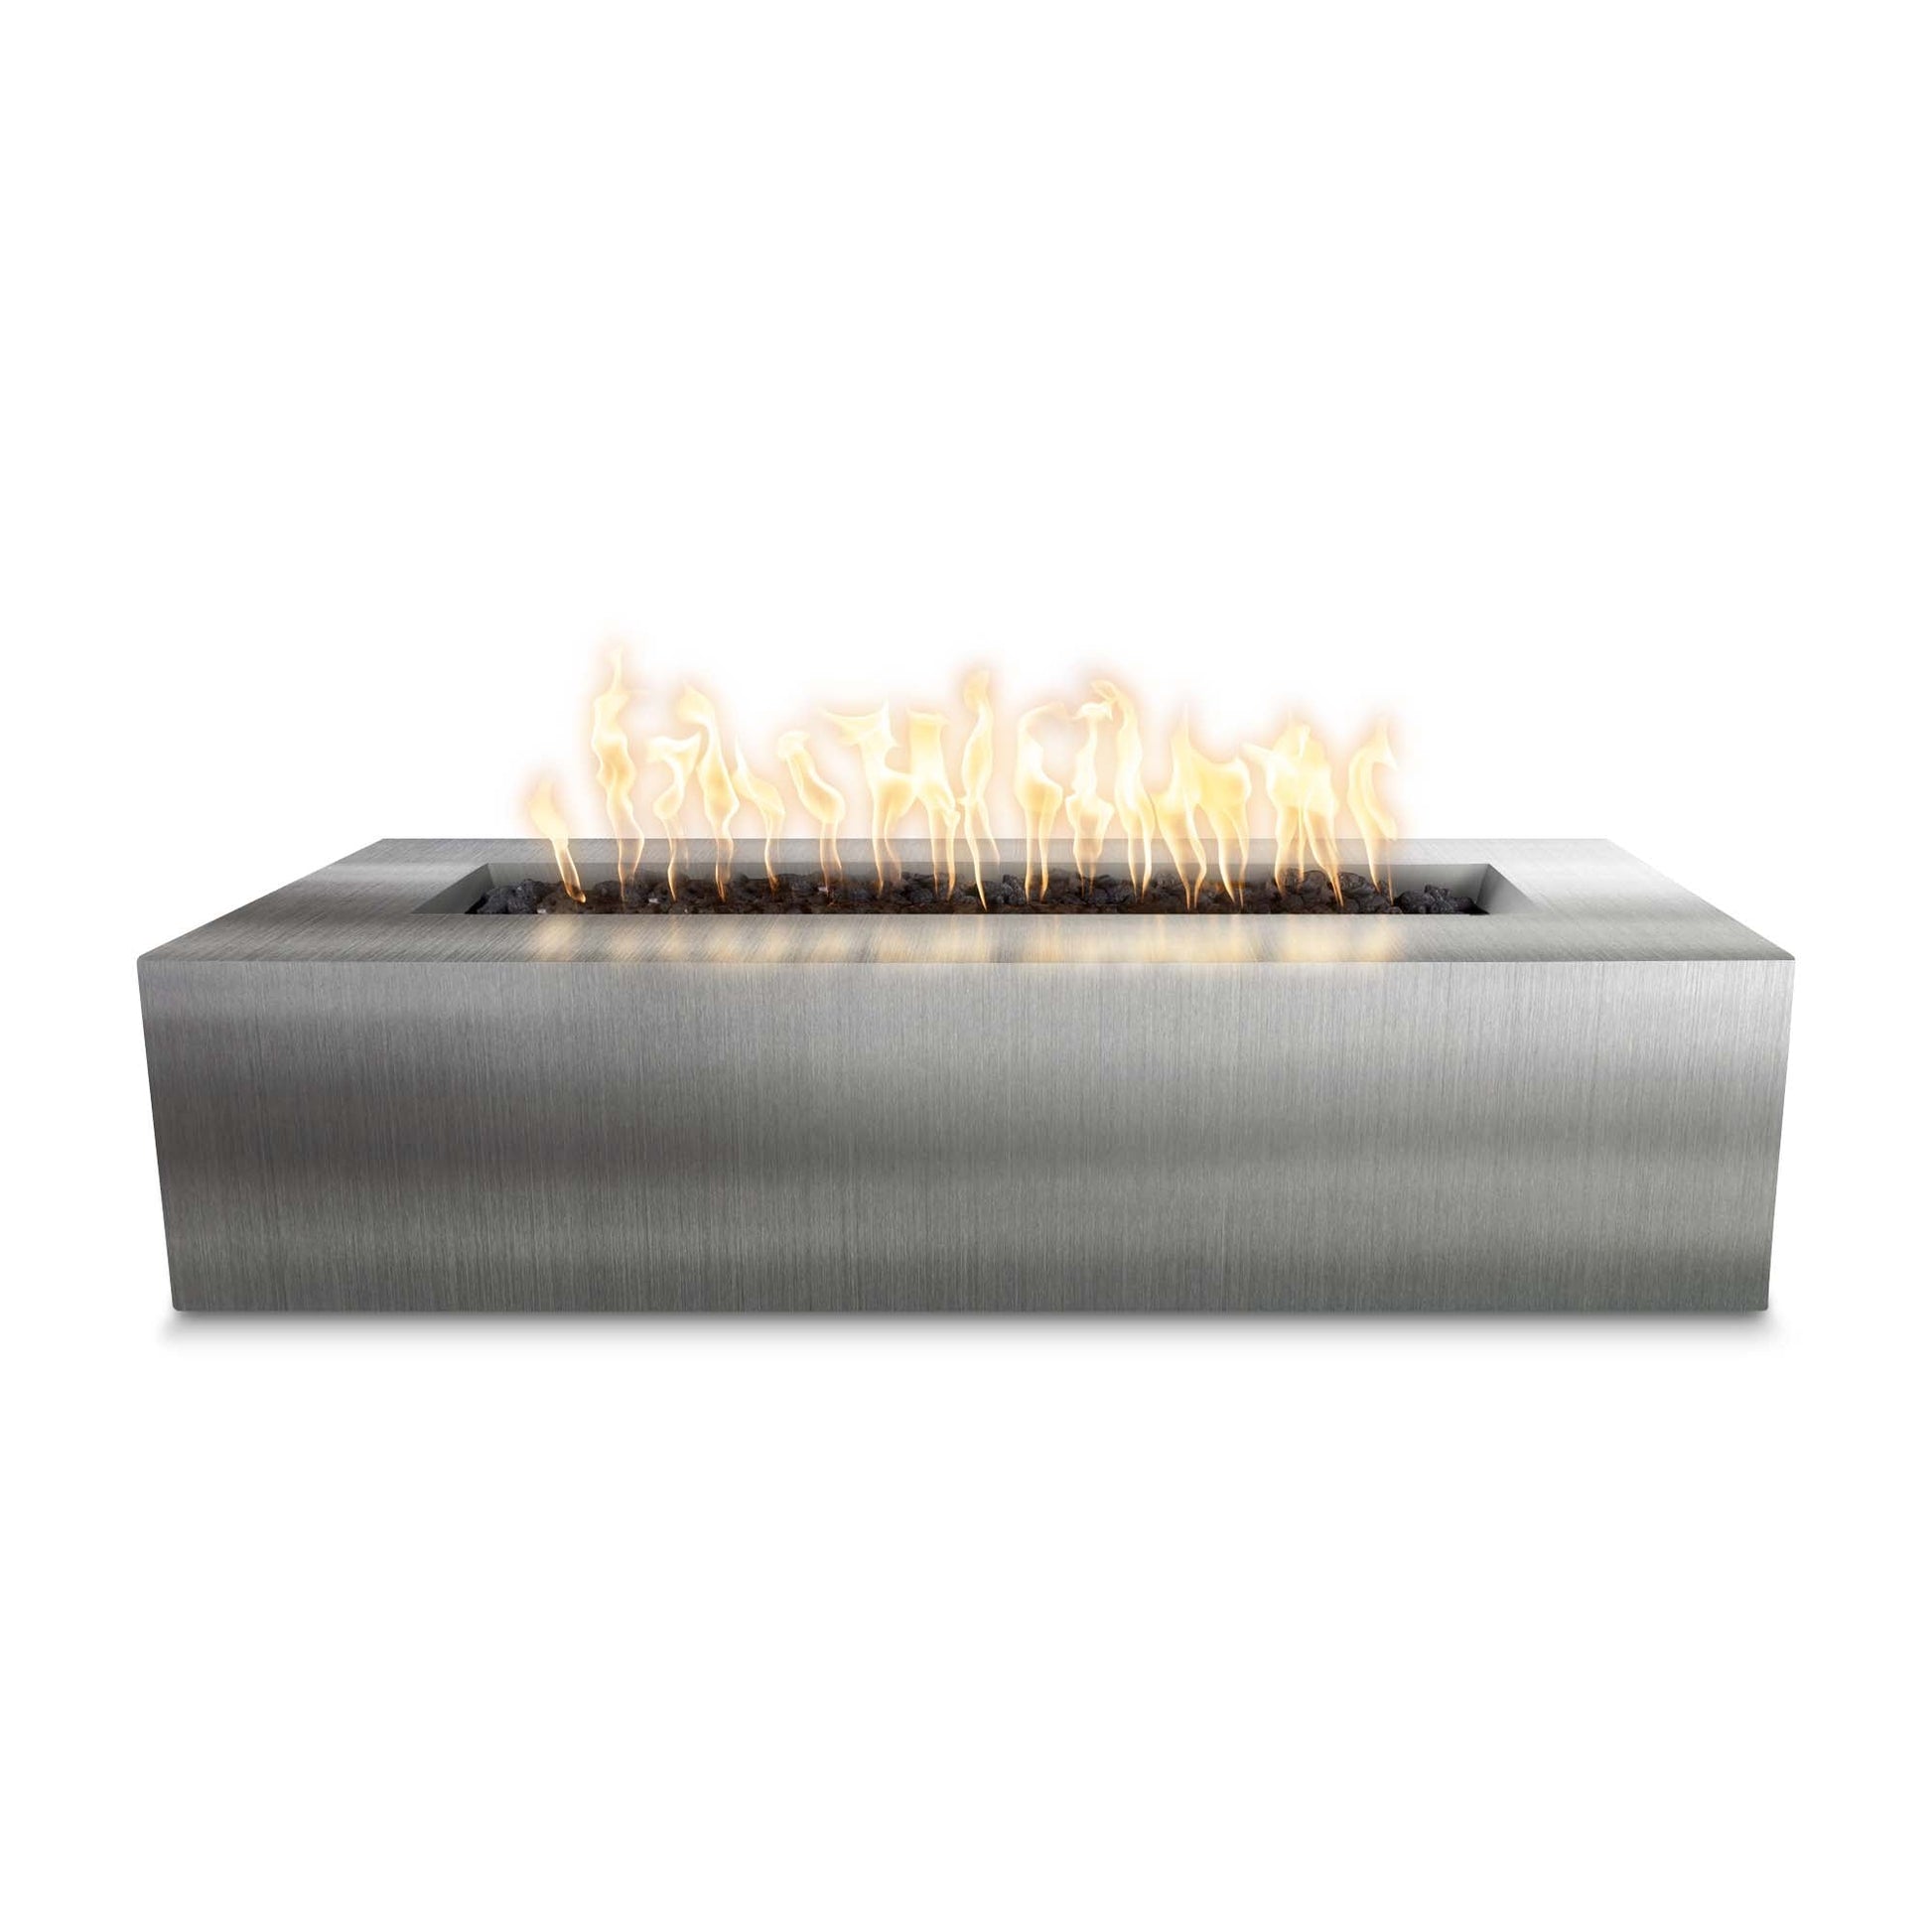 The Outdoor Plus Rectangular Regal 54" Hammered Copper Natural Gas Fire Pit with Match Lit with Flame Sense Ignition